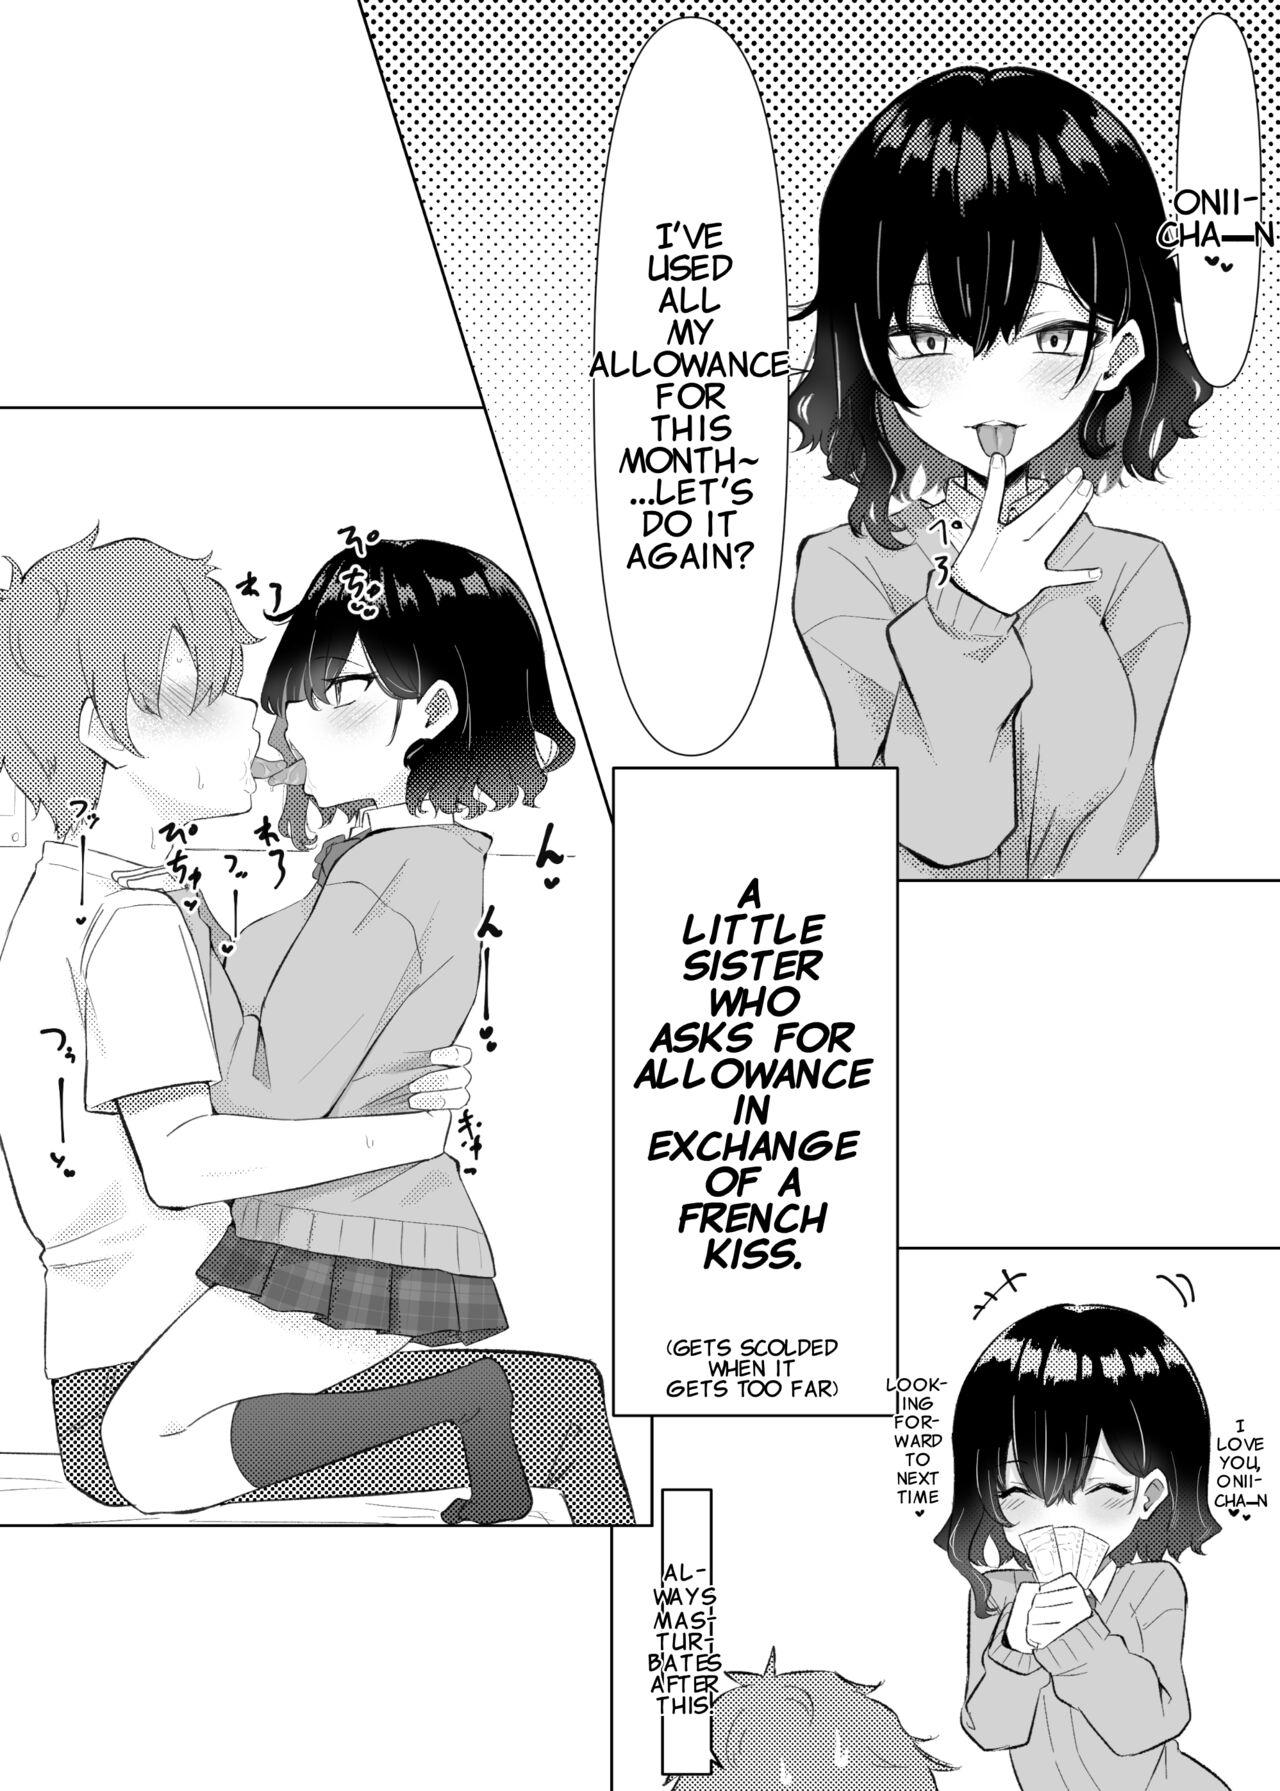 Transsexual [MM] Imouto Series | Kiss-loving Mei-chan [English] - Original Calcinha - Picture 1